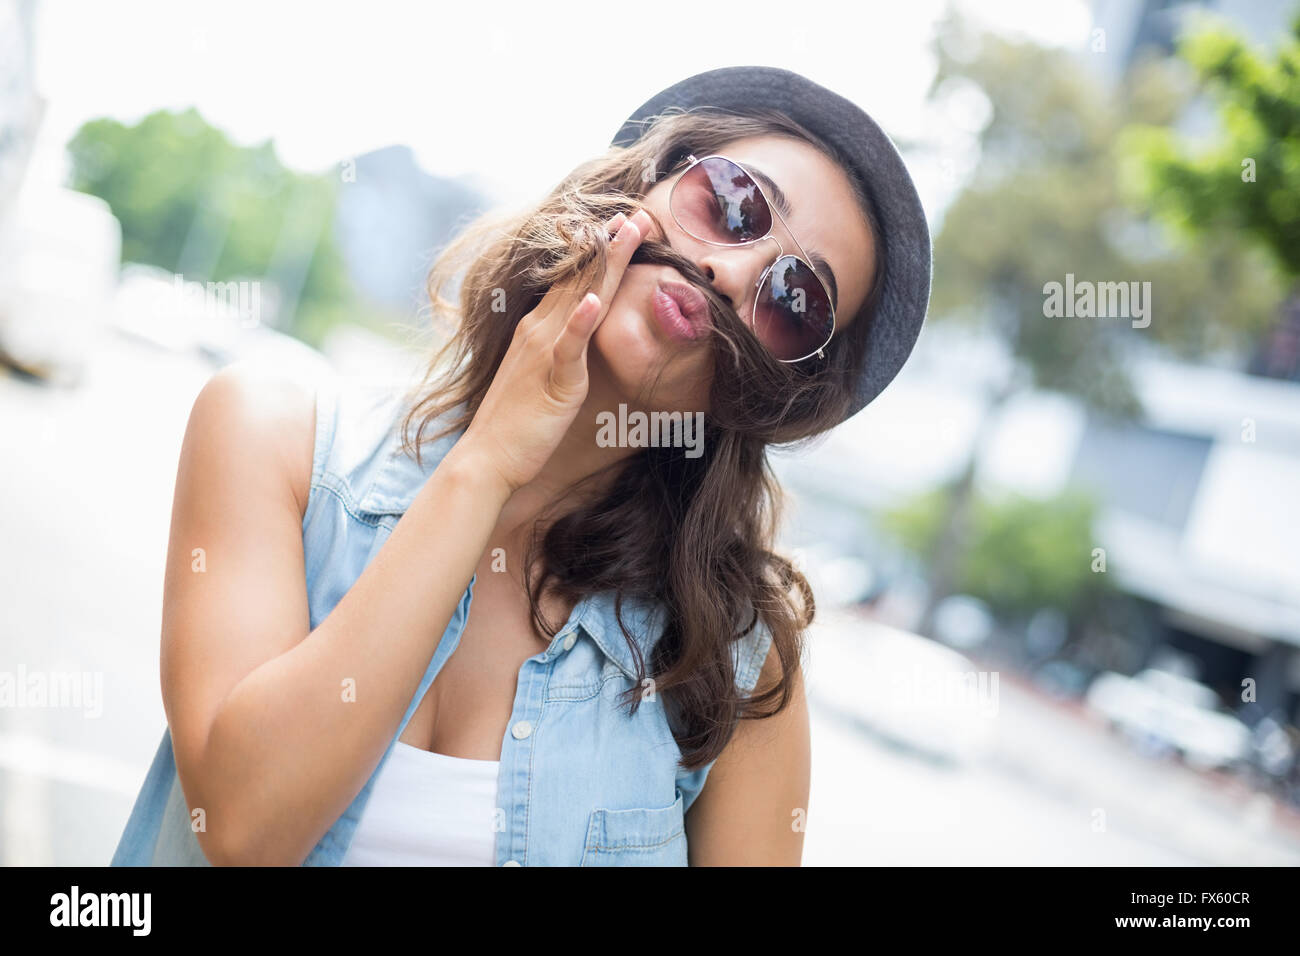 Young woman pulling funny faces Stock Photo